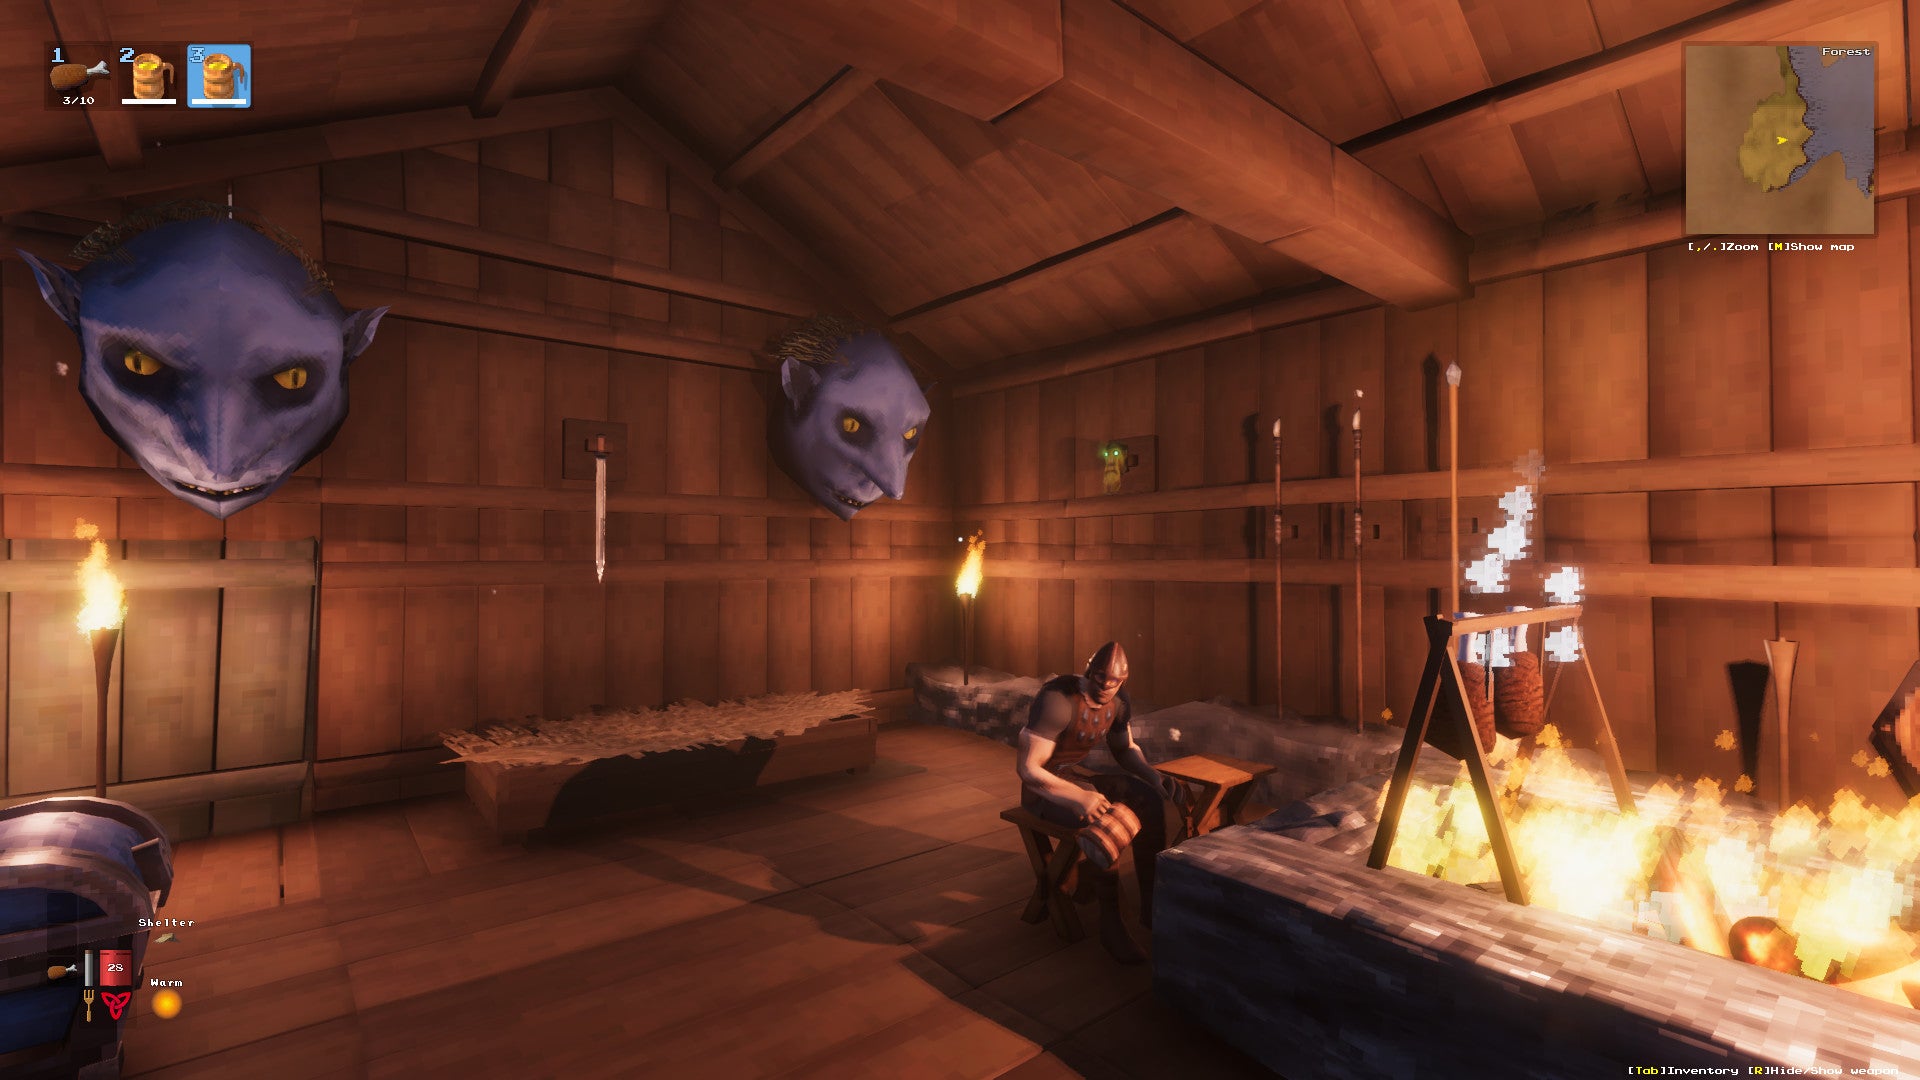 A Valheim screenshot of a house interior, with weapons and trophies on the wall and a player in the foreground sitting on a stool.